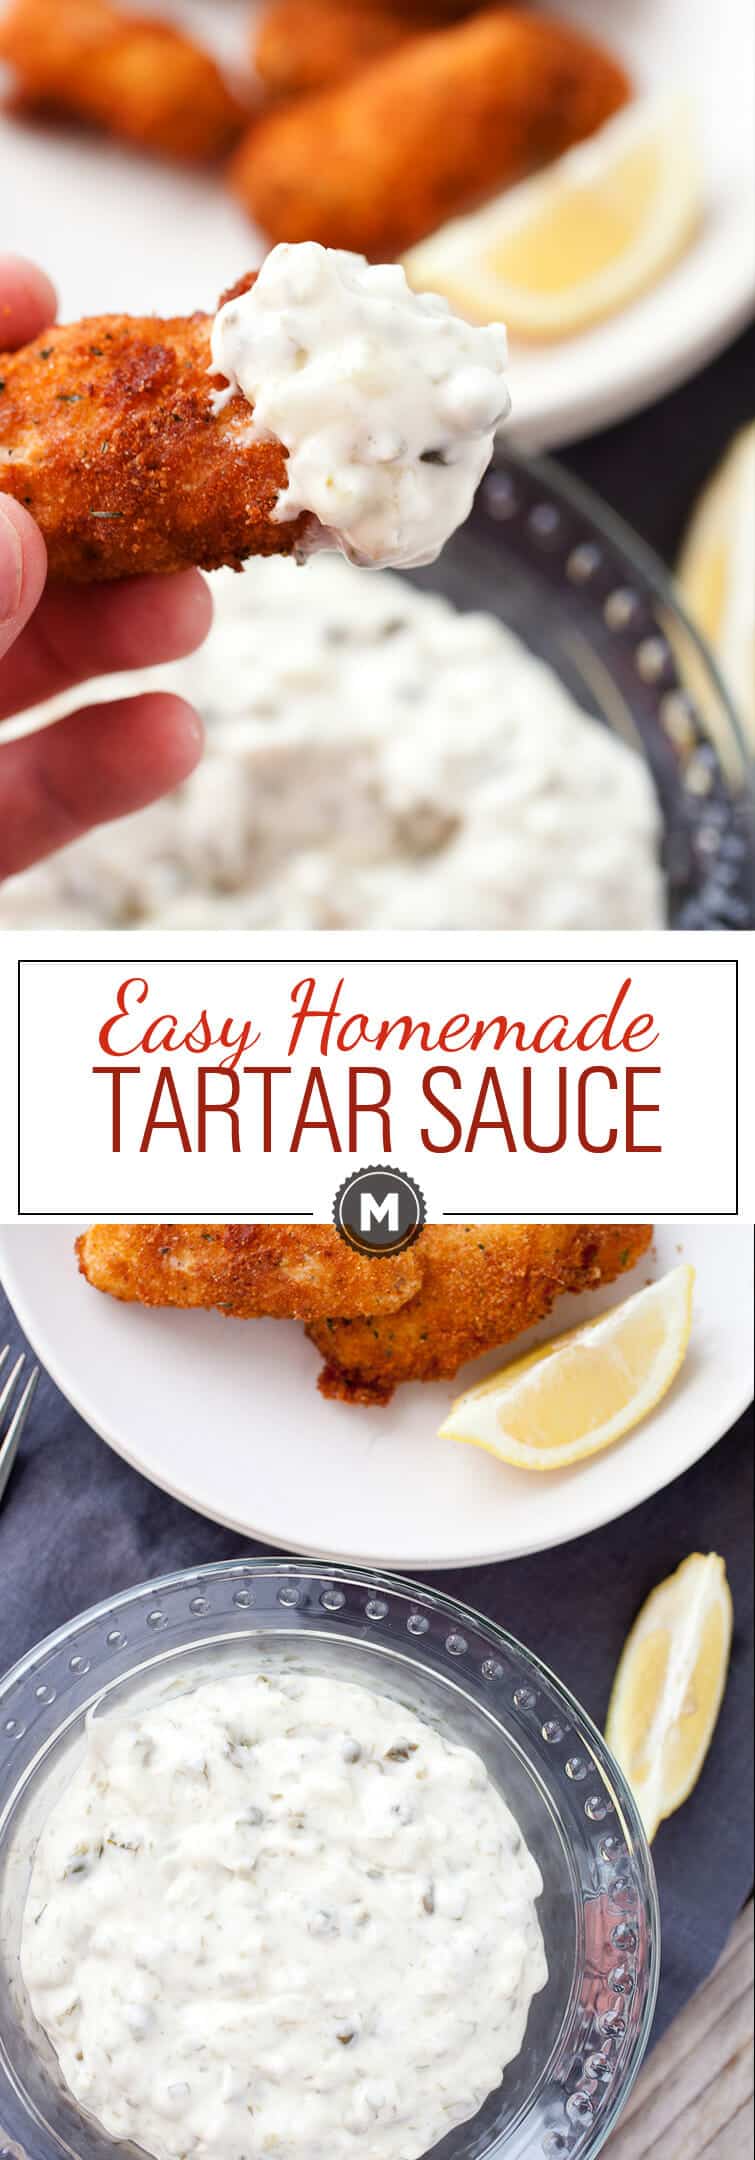 Easy Homemade Tartar sauce: This is really the perfect quick tartar sauce. It's the perfect mix of savory, sweet, tart, and creamy. Do not skimp on the capers! | macheesmo.com